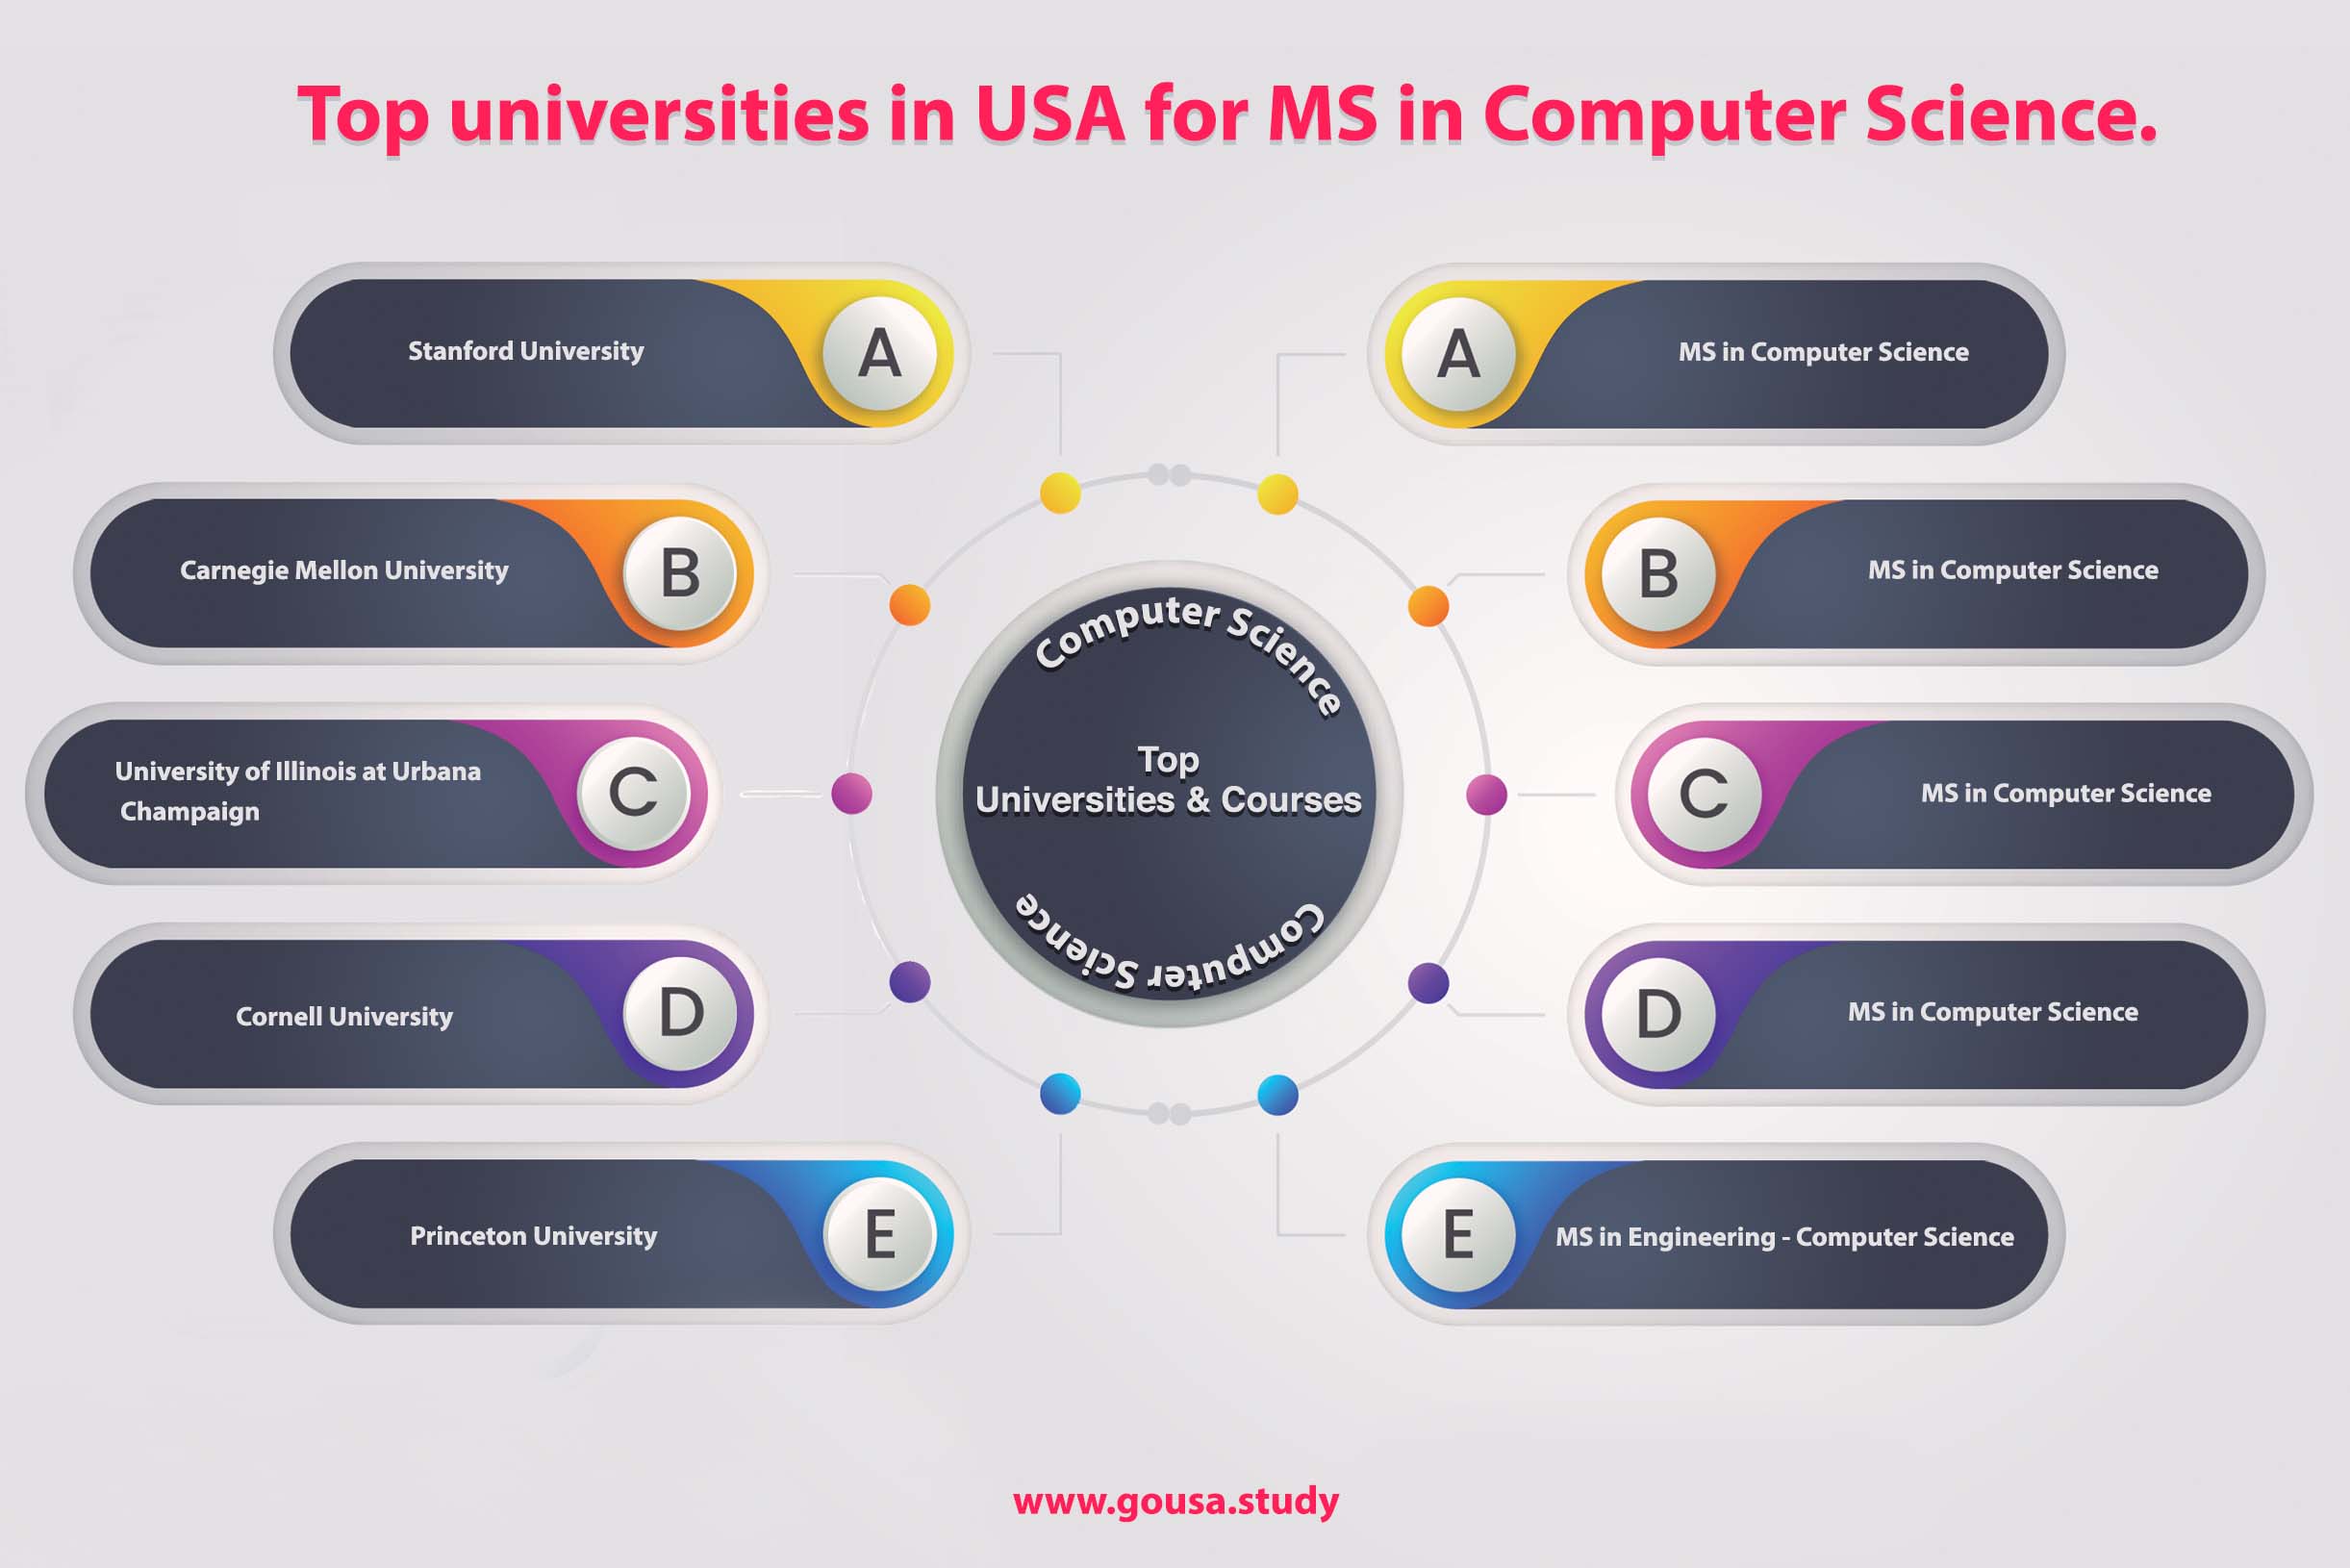 Top Universities in USA for MS in Computer Science